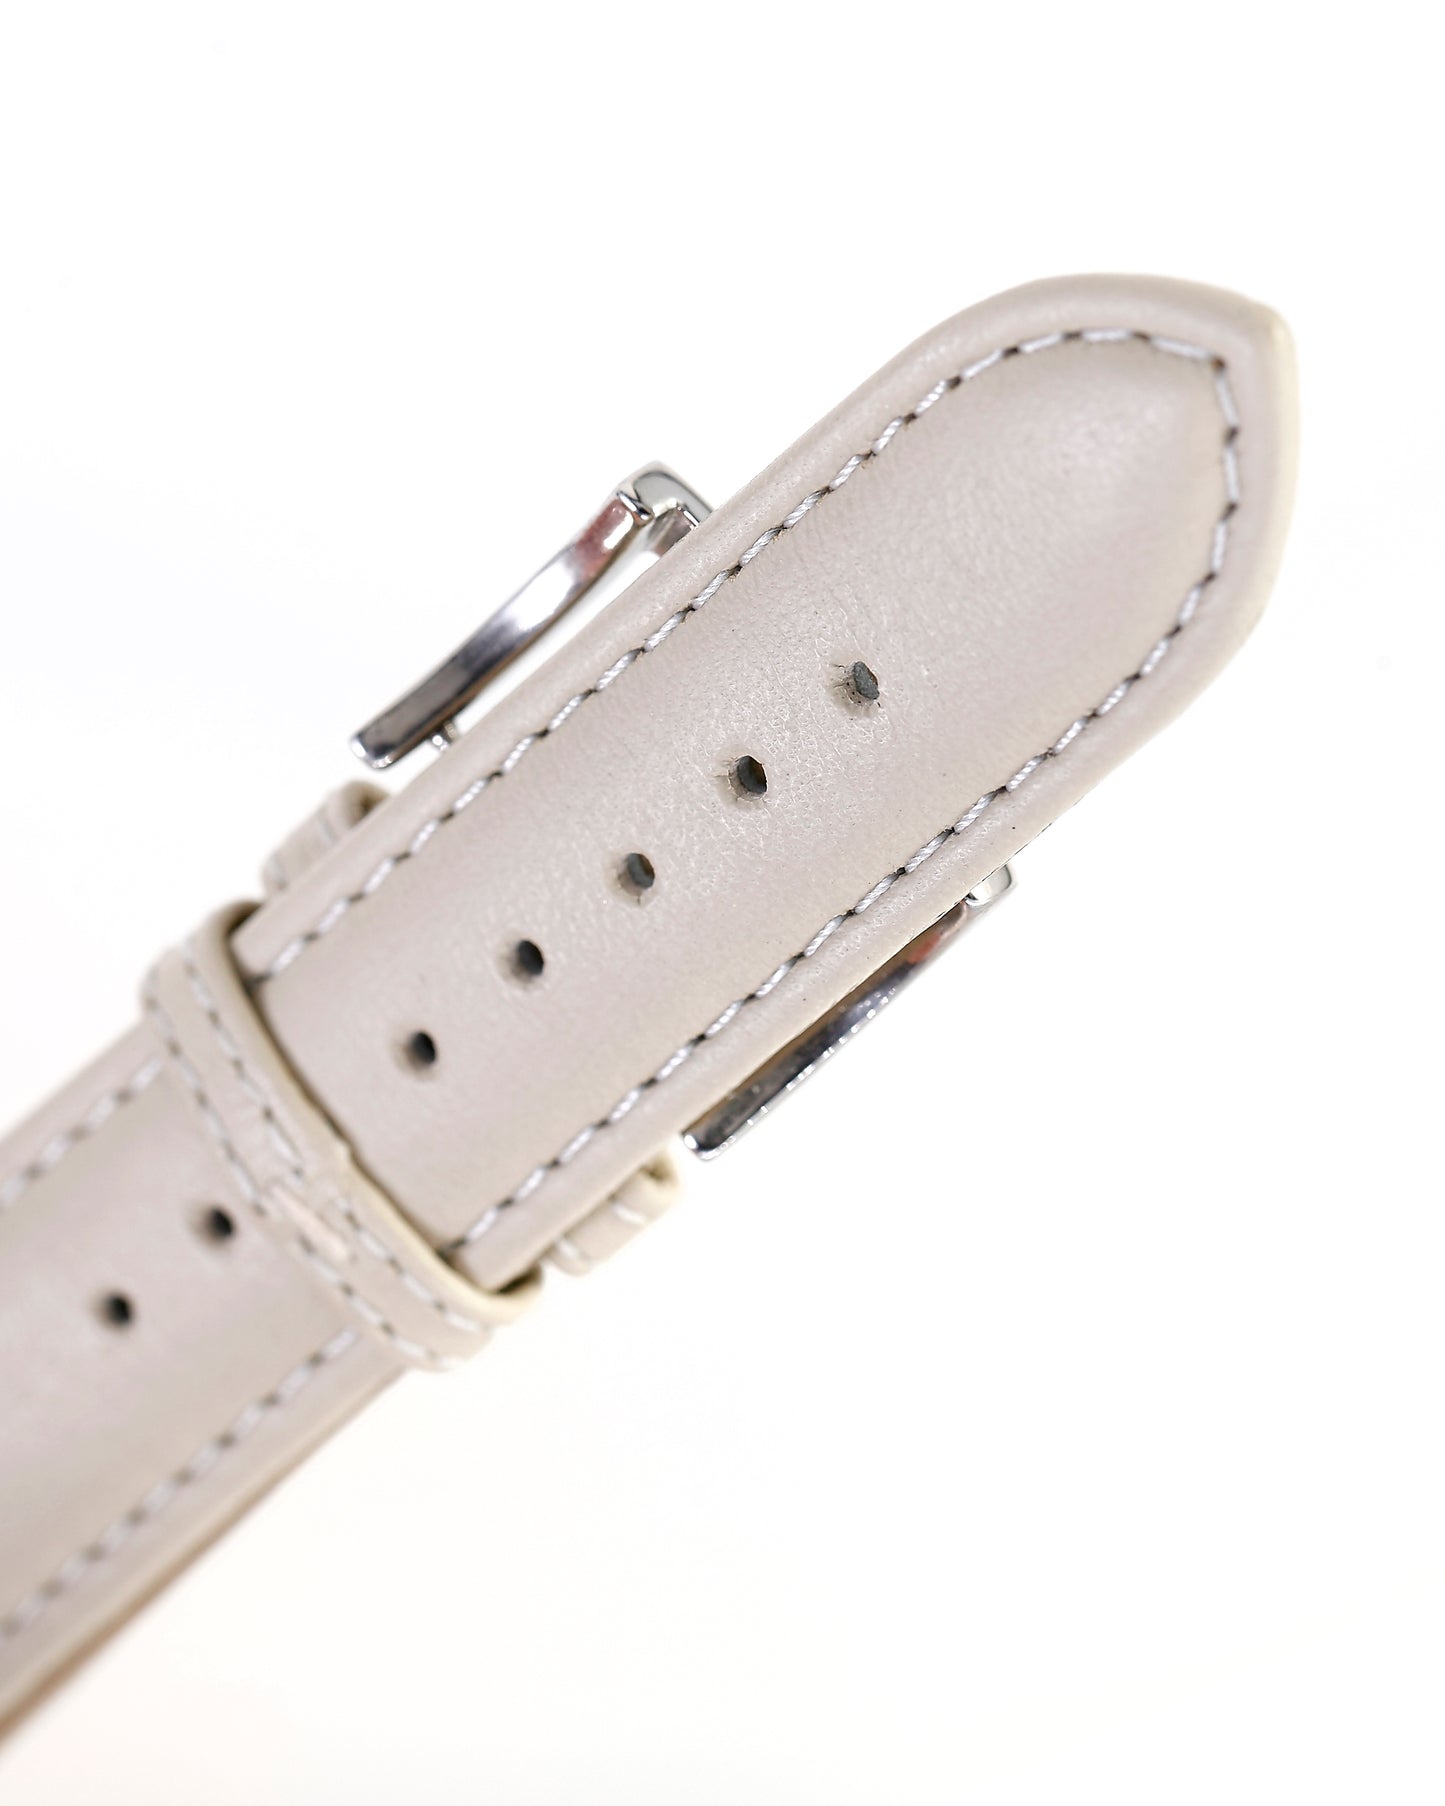 Ecclissi 23155 Off White Leather Strap 20mm x 18mm